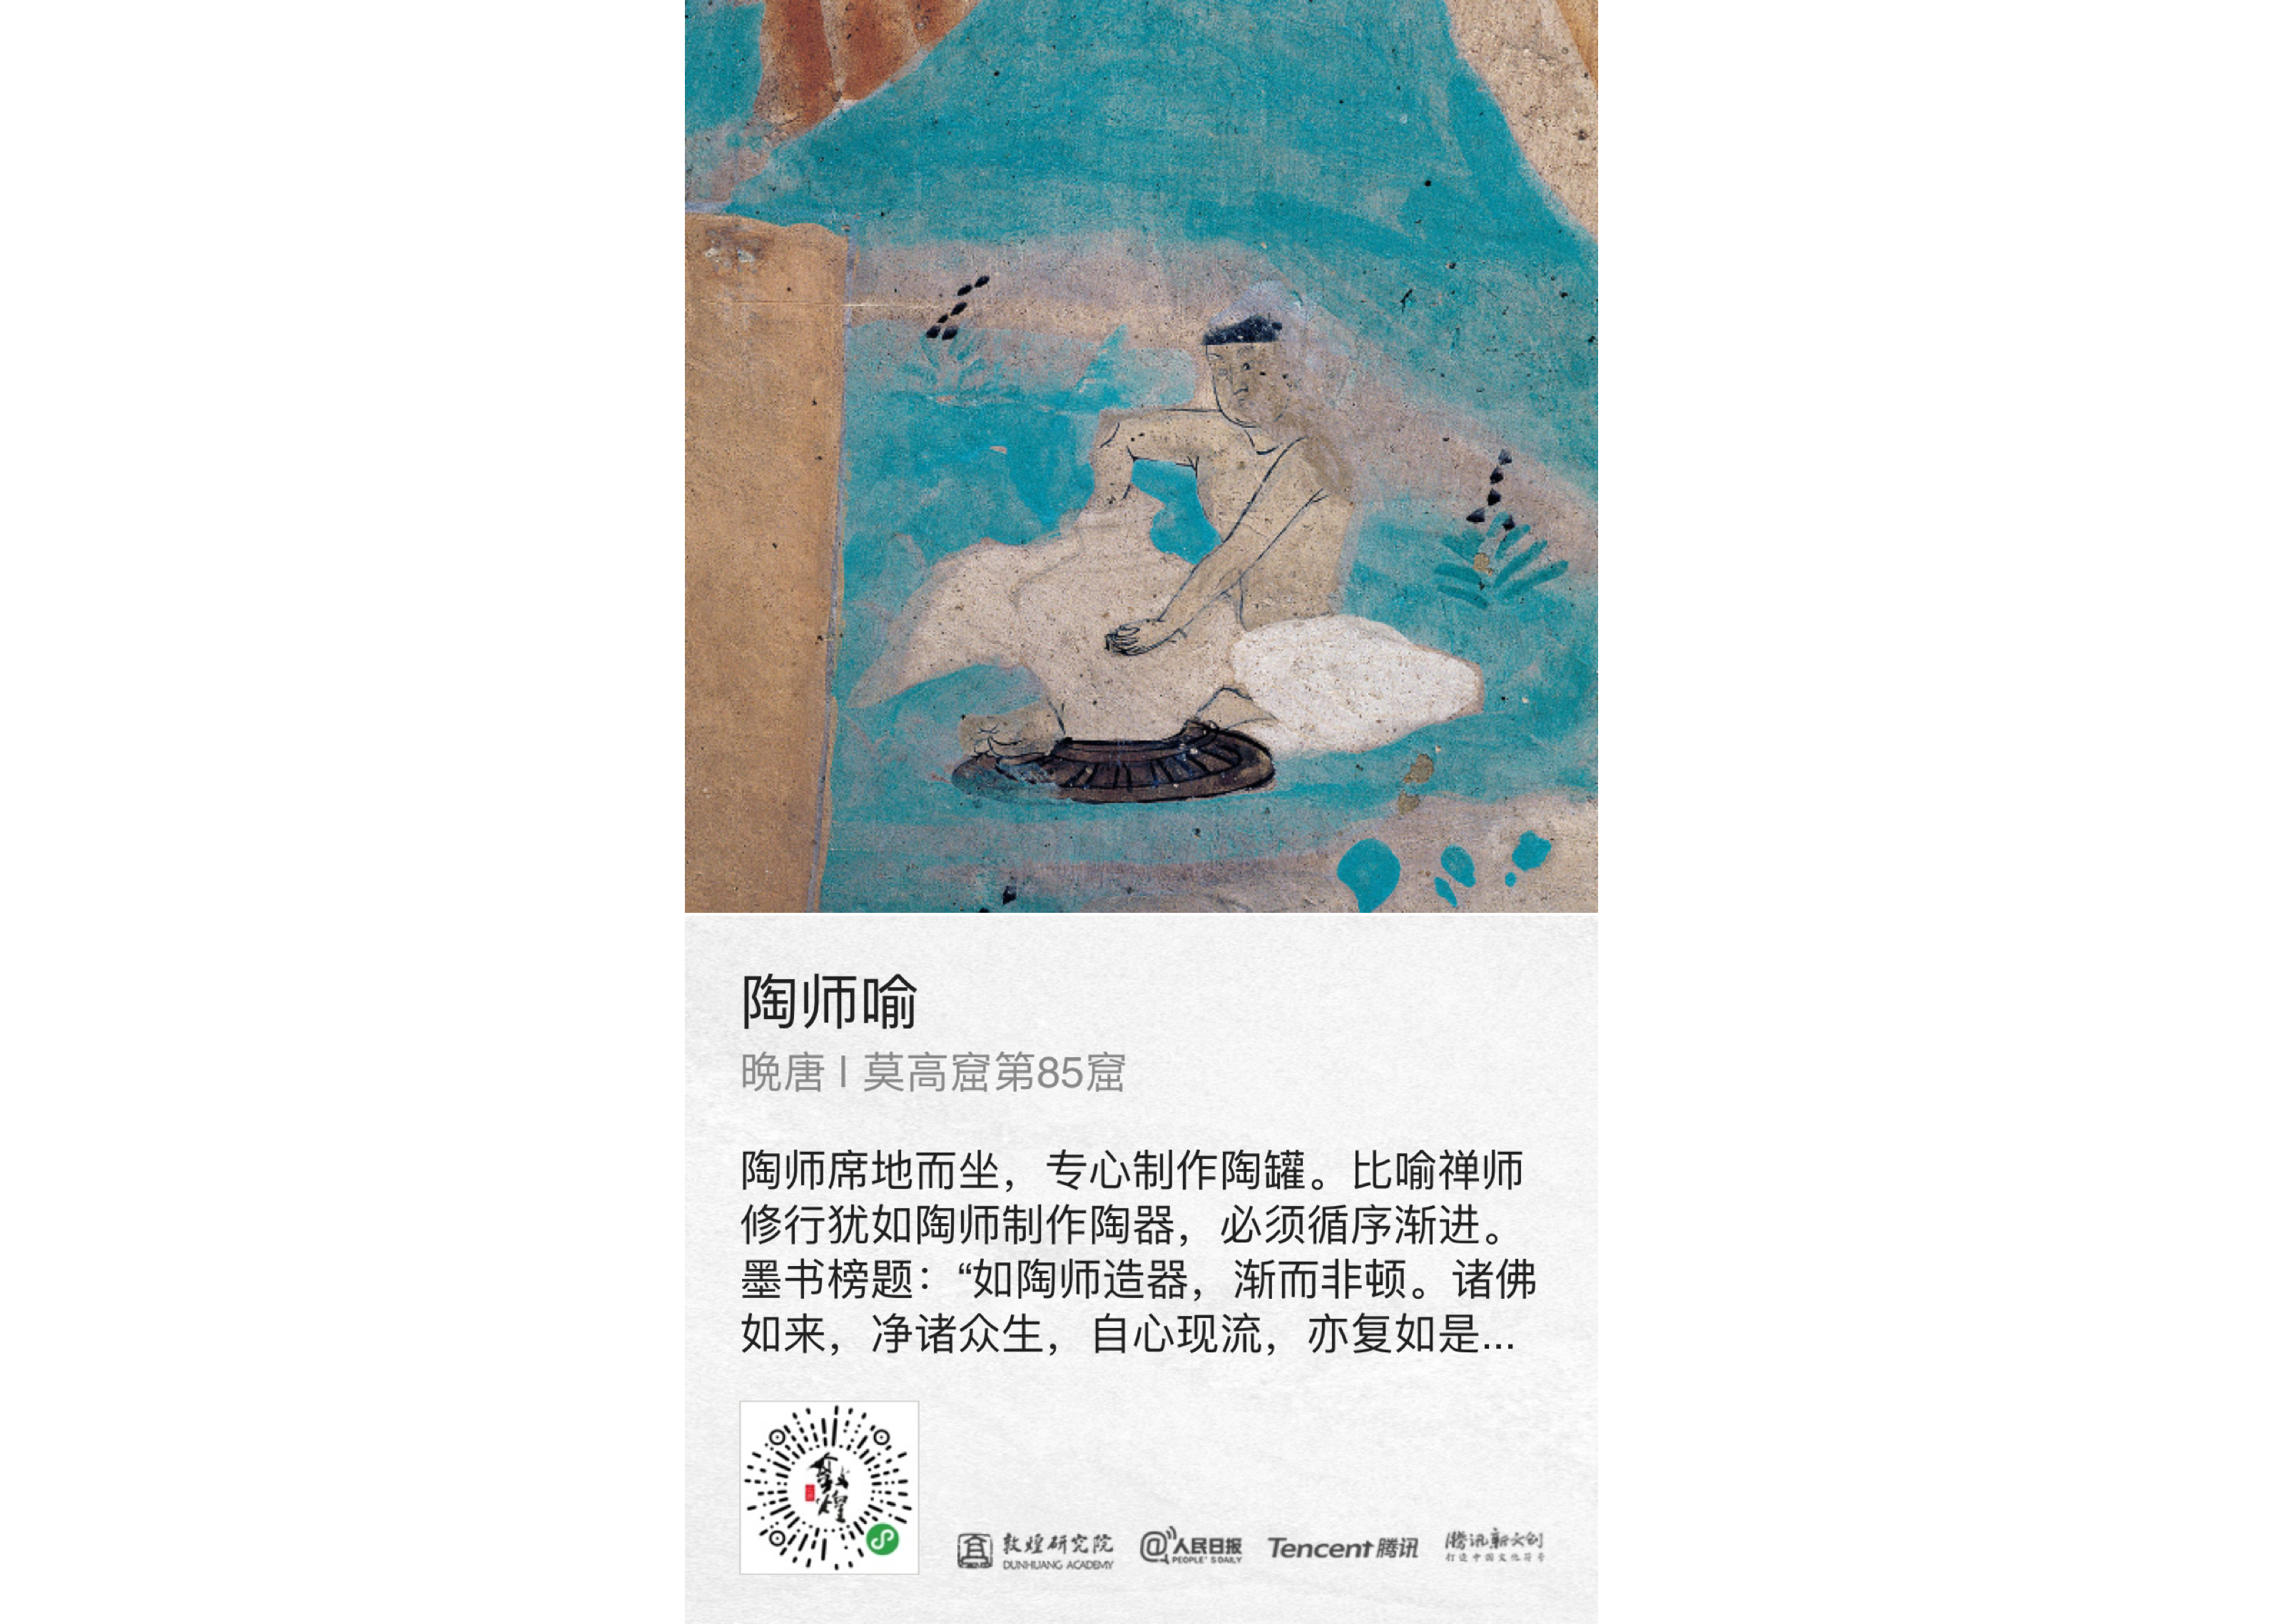 design-story-of-dunhuang-trip - p10